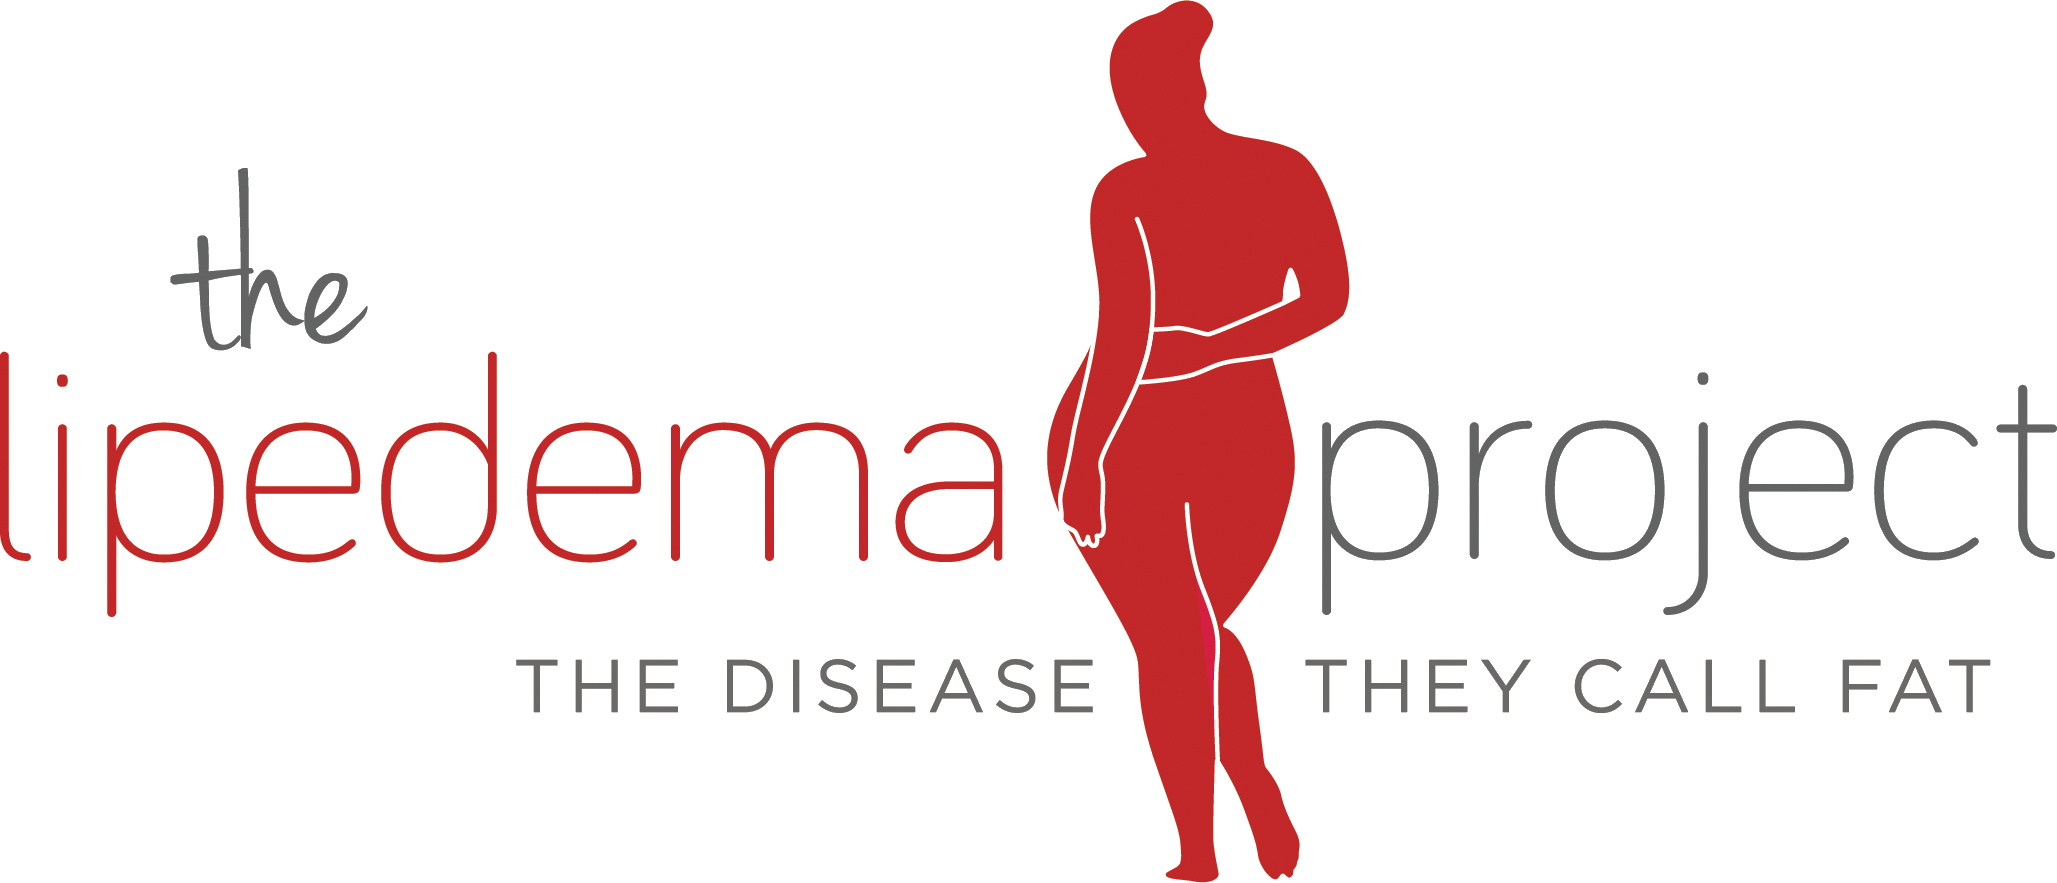 About the Lipedema Project